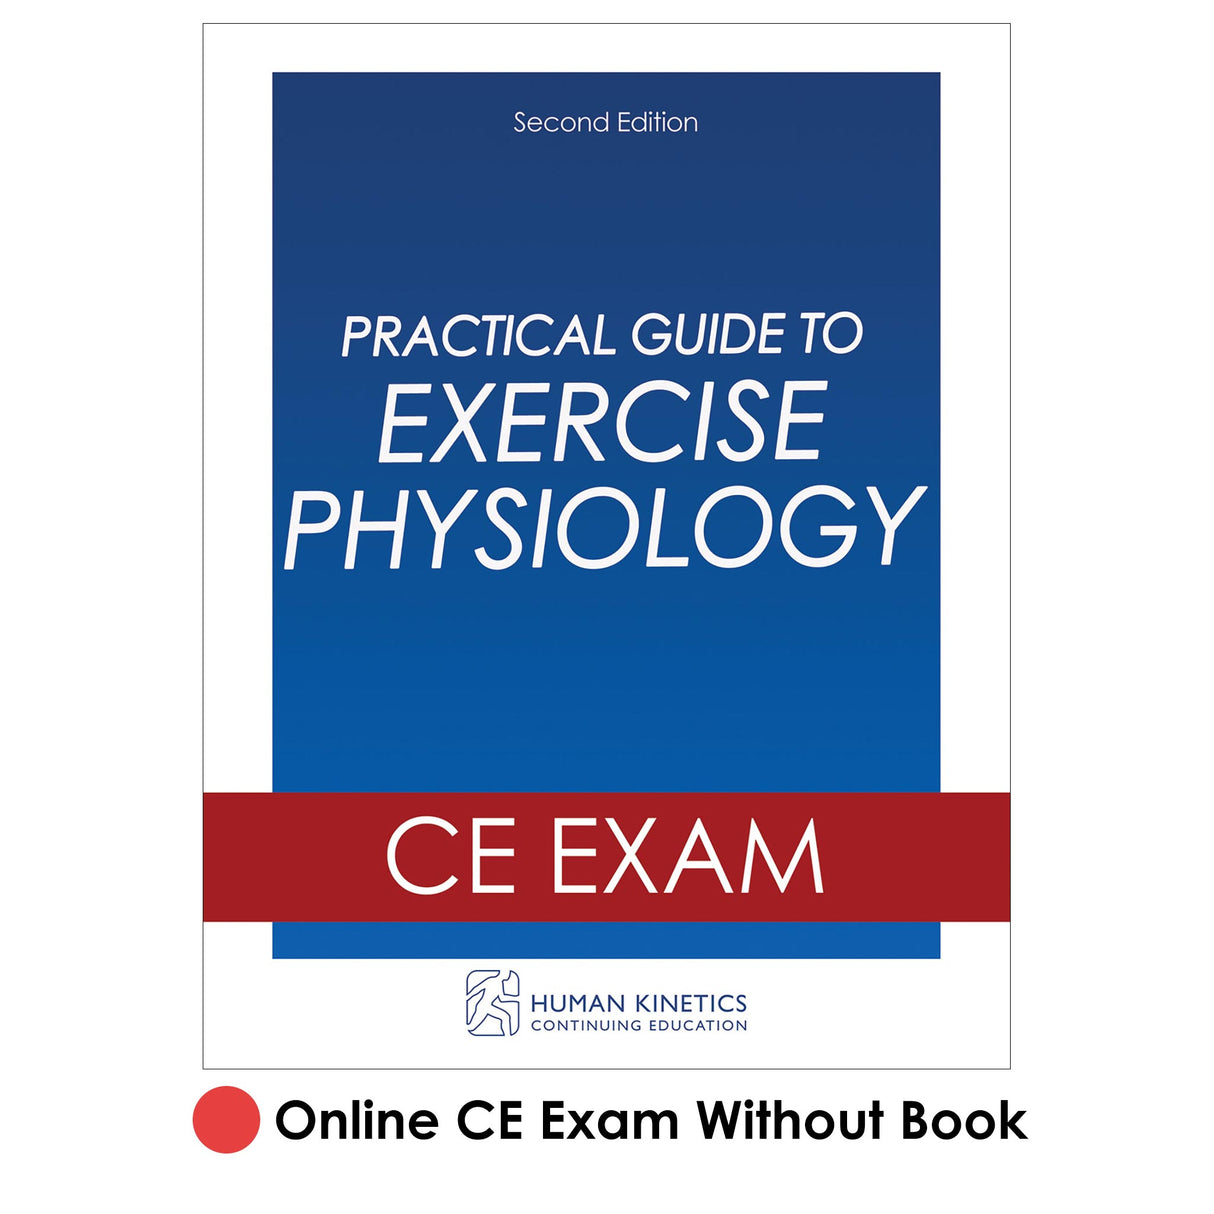 Practical Guide to Exercise Physiology 2nd Edition Online CE Exam Without Book